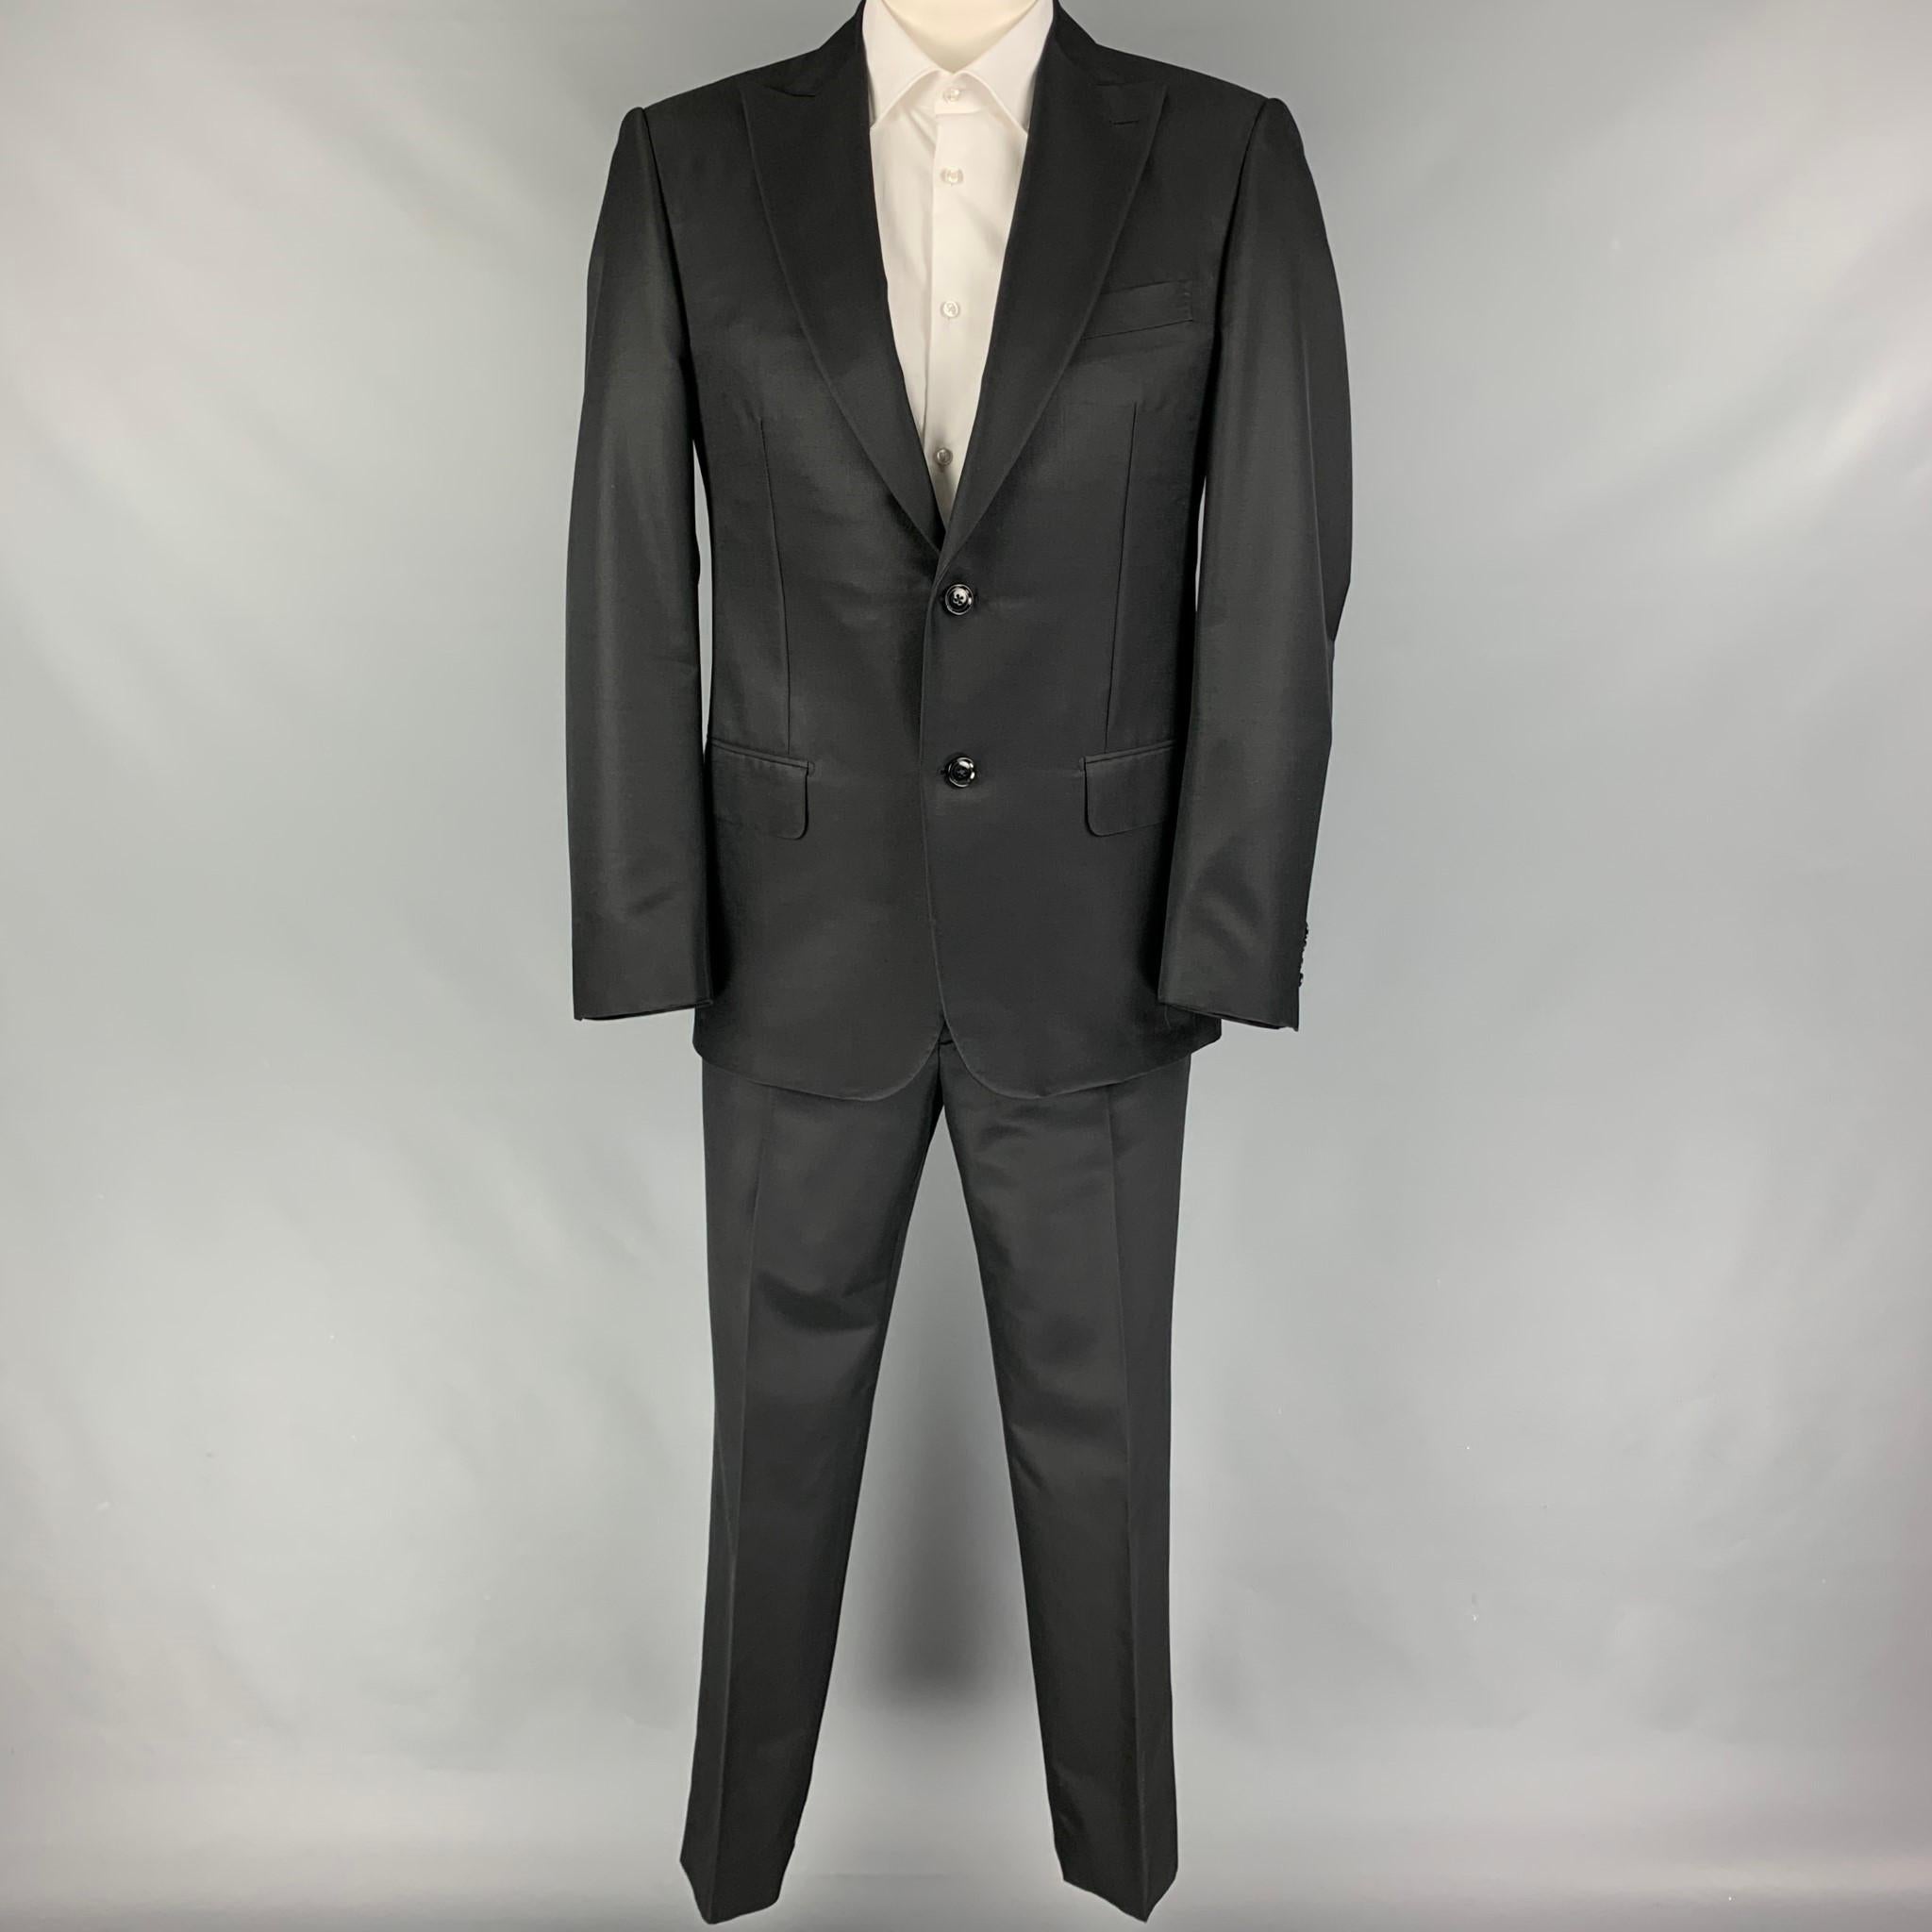 PAL ZILERI suit comes in a black wool / silk with a full liner and includes a single breasted, single button sport coat with peak lapel and matching flat front trousers. Made in Italy.

Very Good Pre-Owned Condition.
Marked: